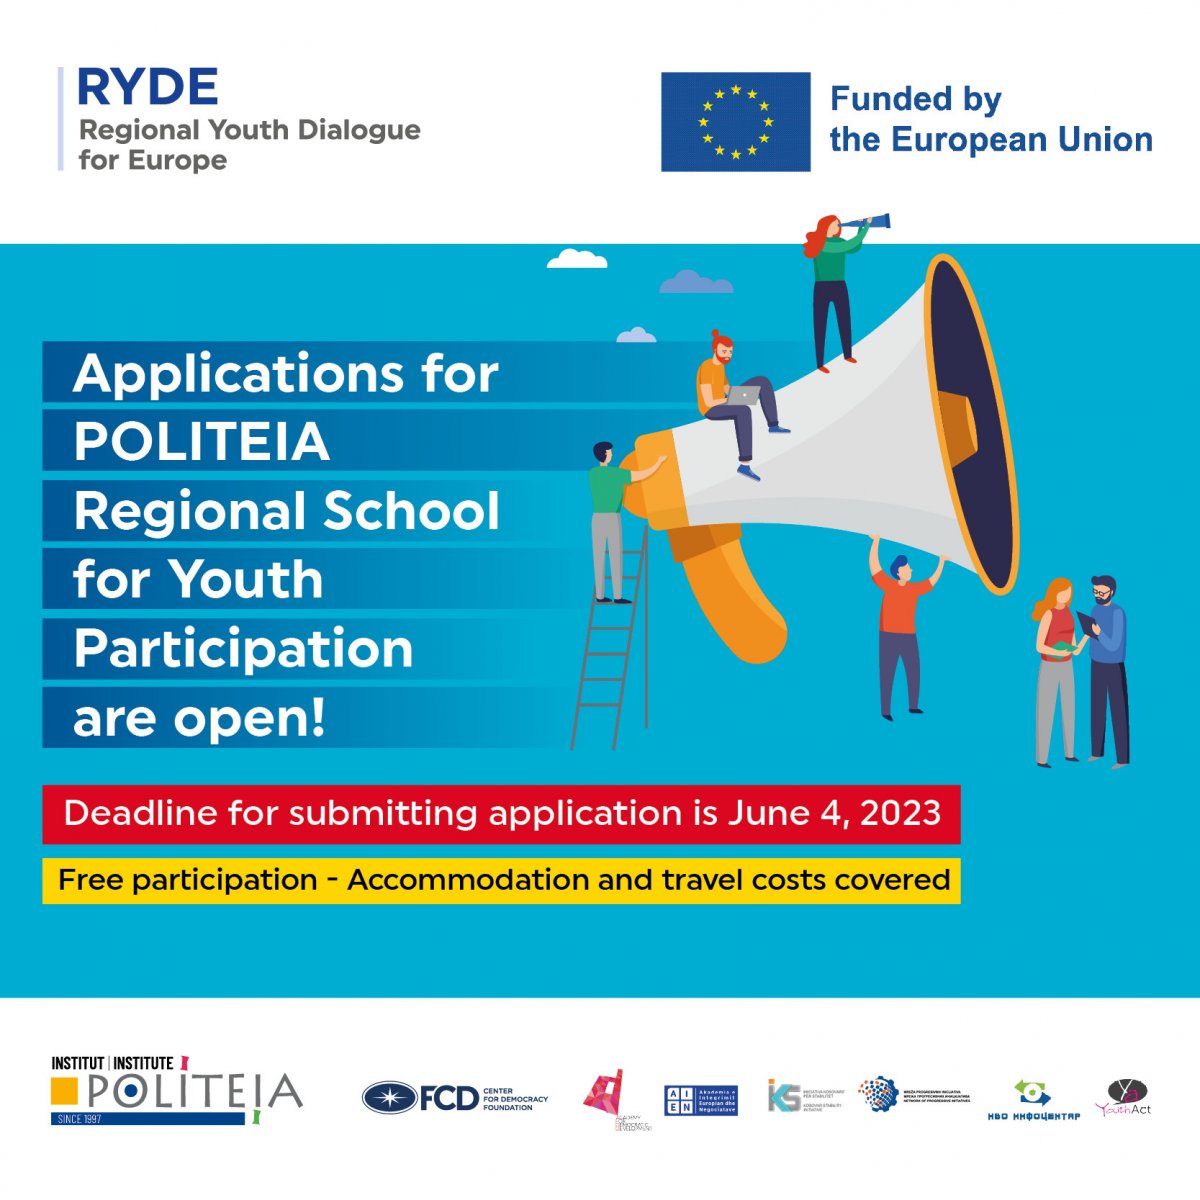 Applications for POLITEIA Regional School for Youth Participation 2023 are open!